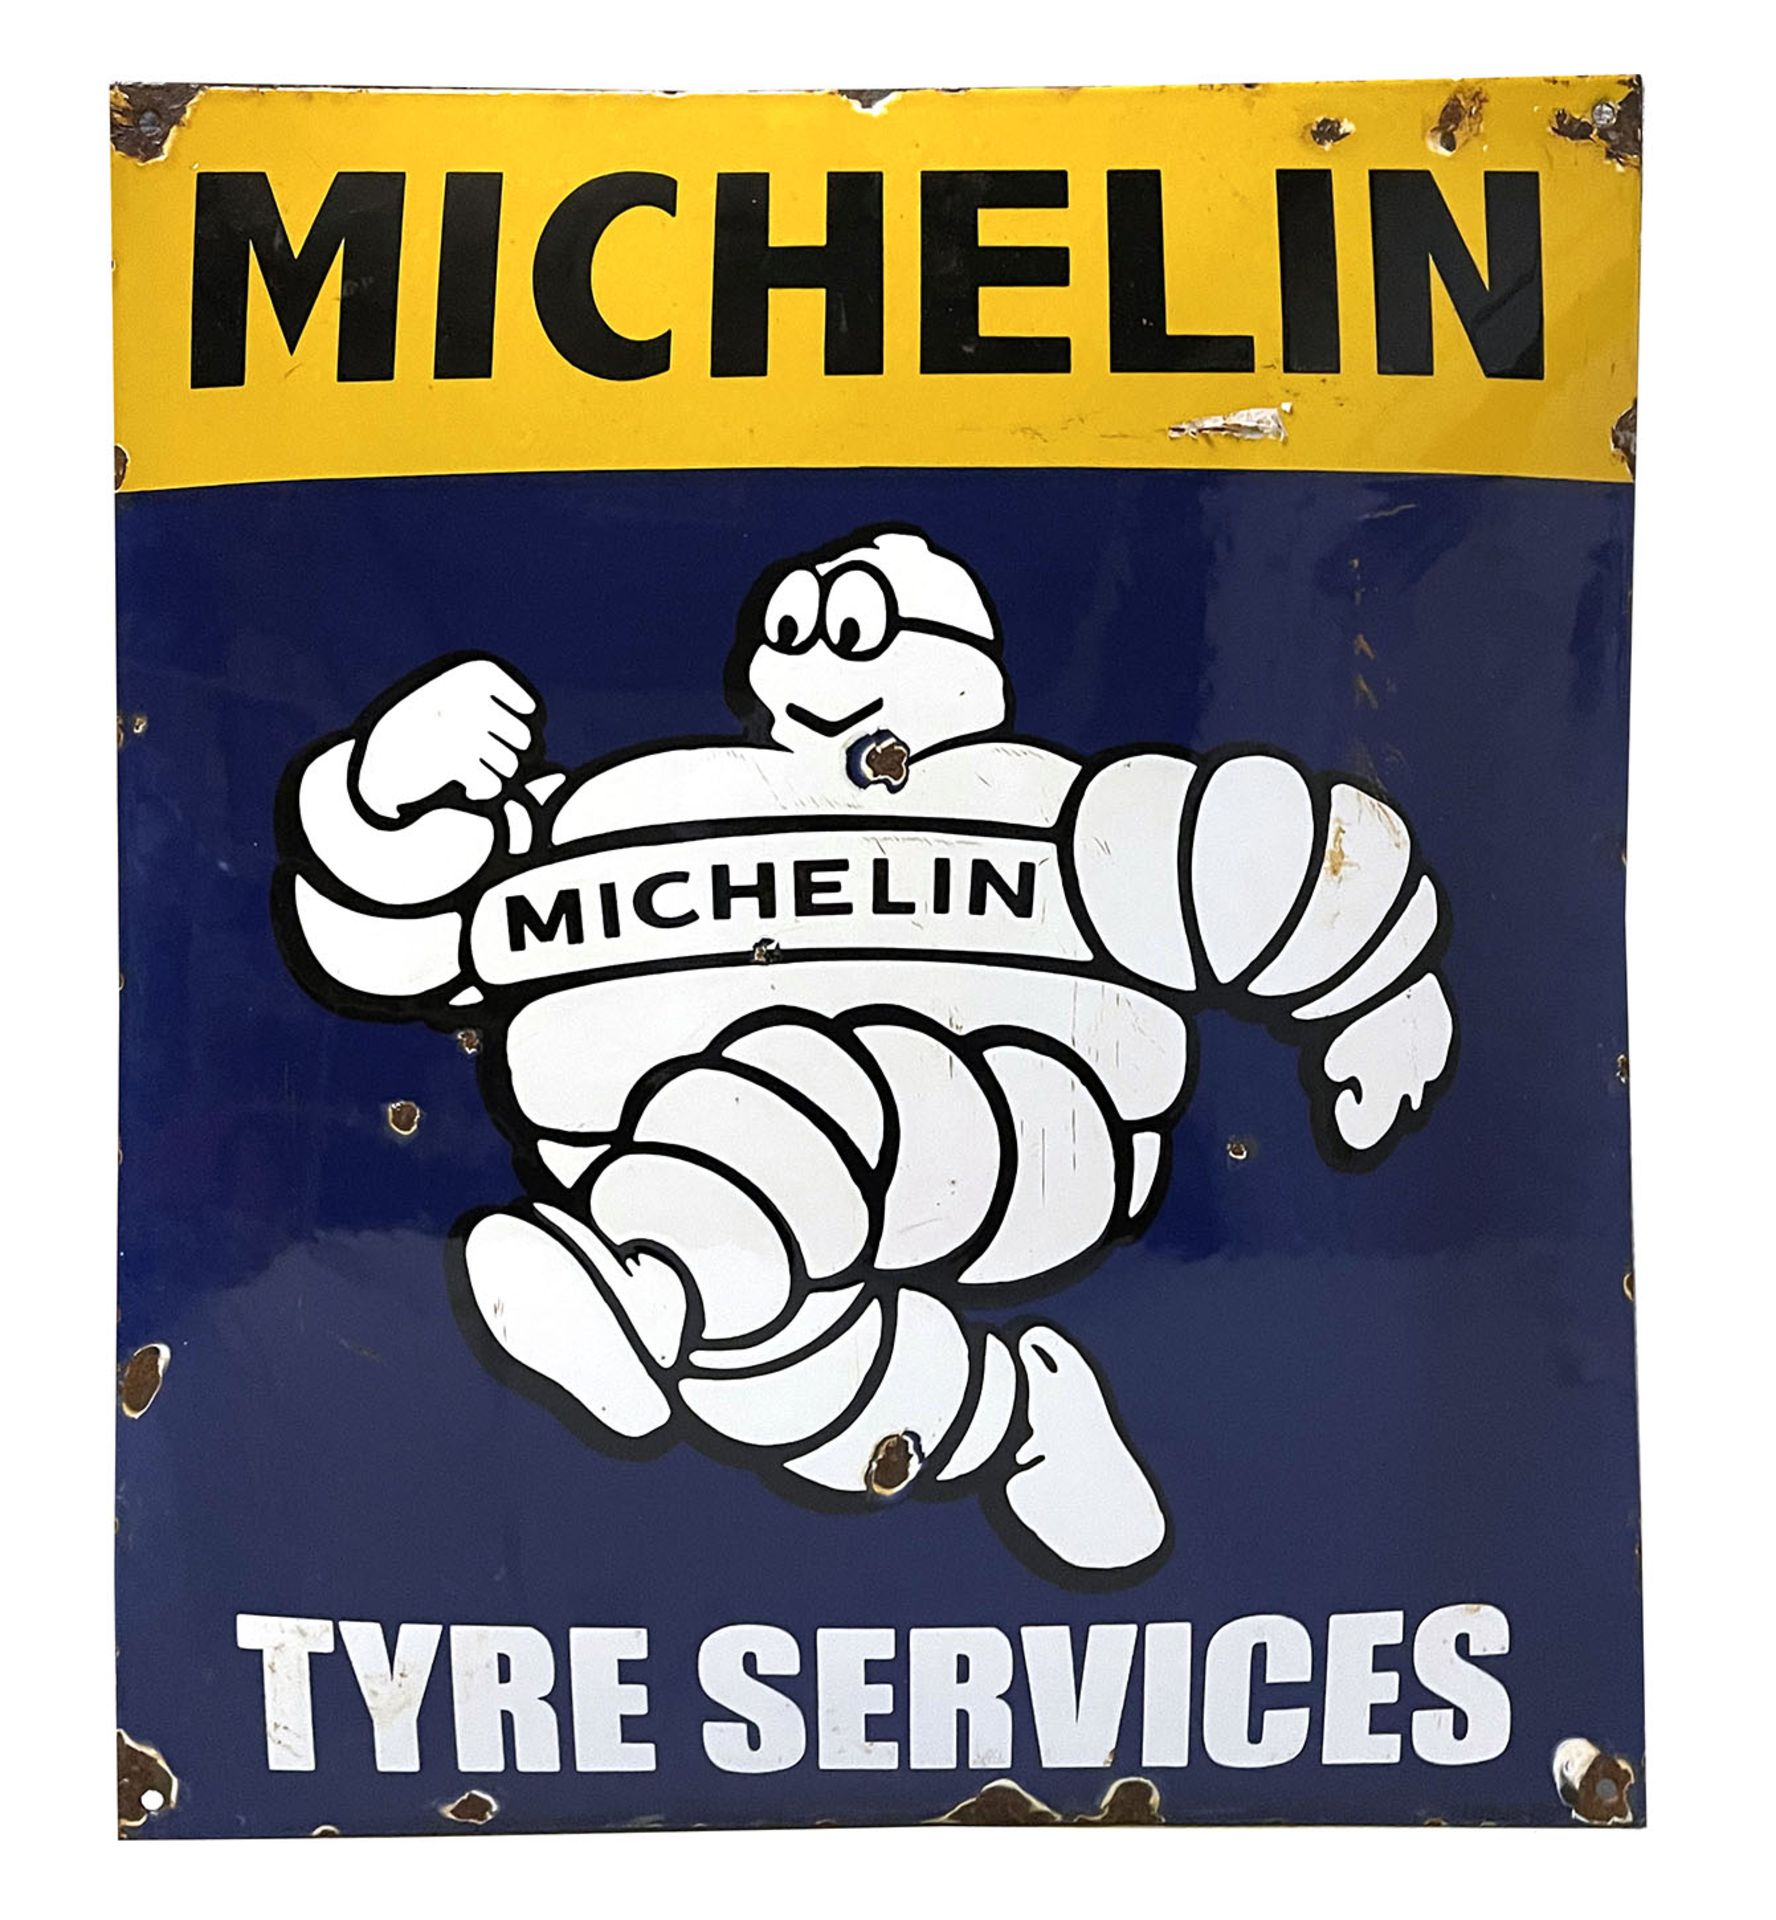 Michelin Tyre Services Enamel Sign